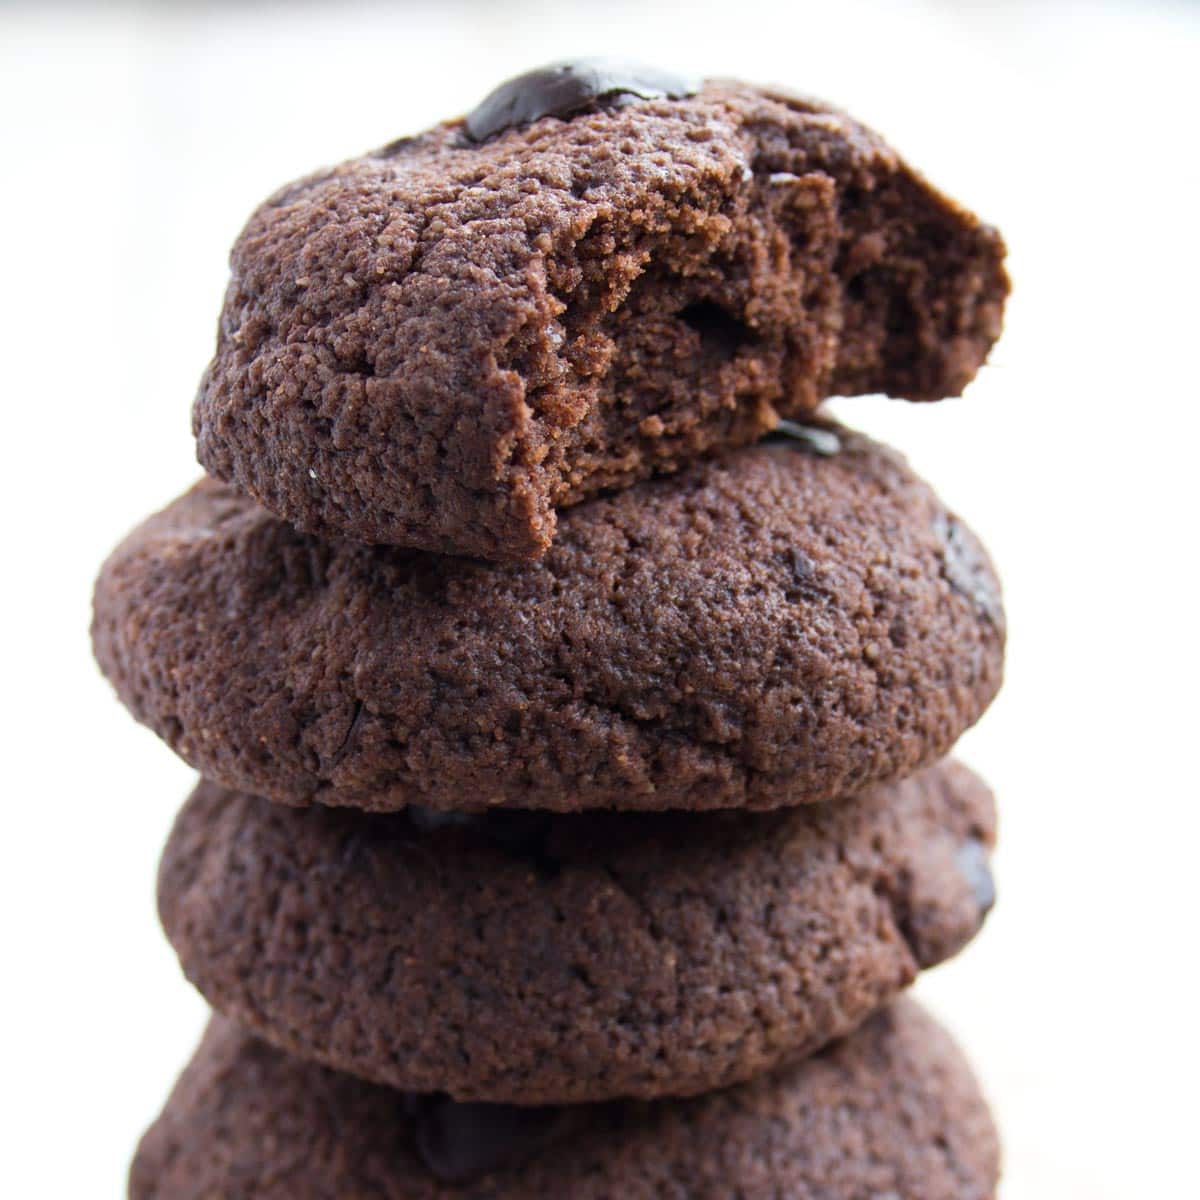 chocolate cookies stacked on top of one another, the top cookie is bitten into